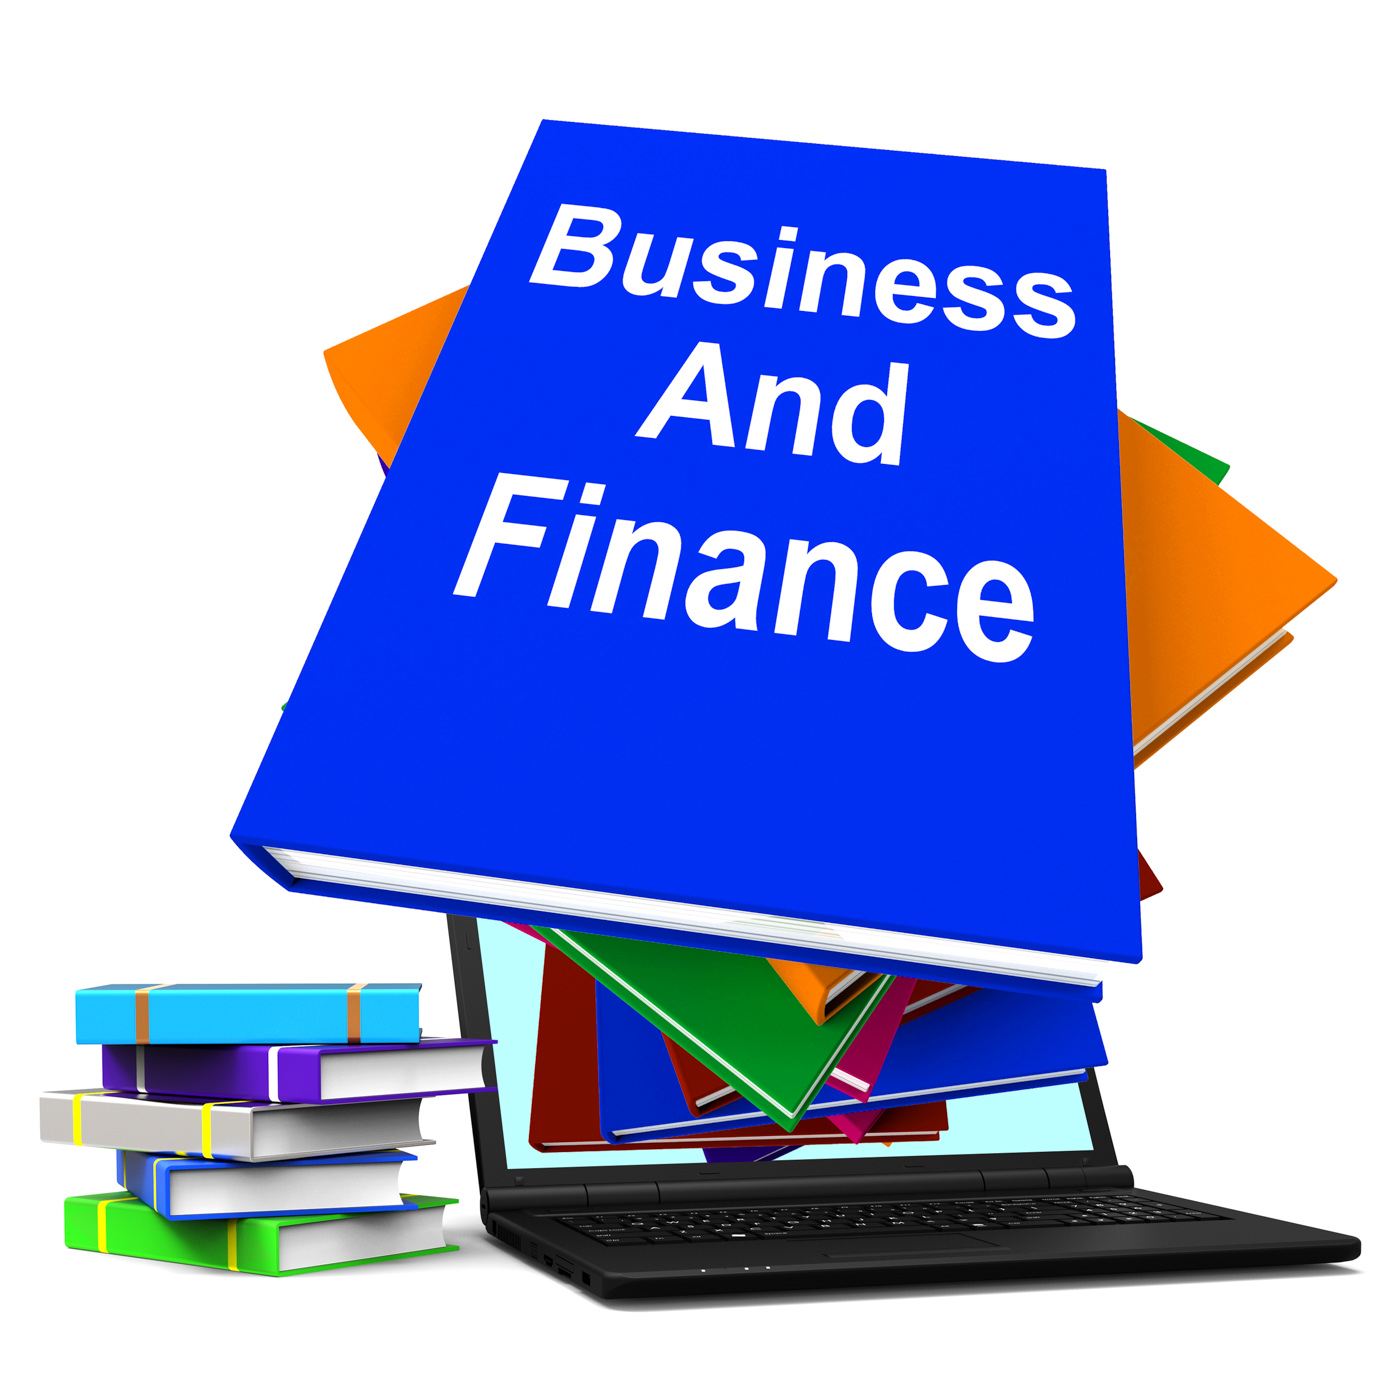 Business and finance book stack laptop shows businesses finances photo